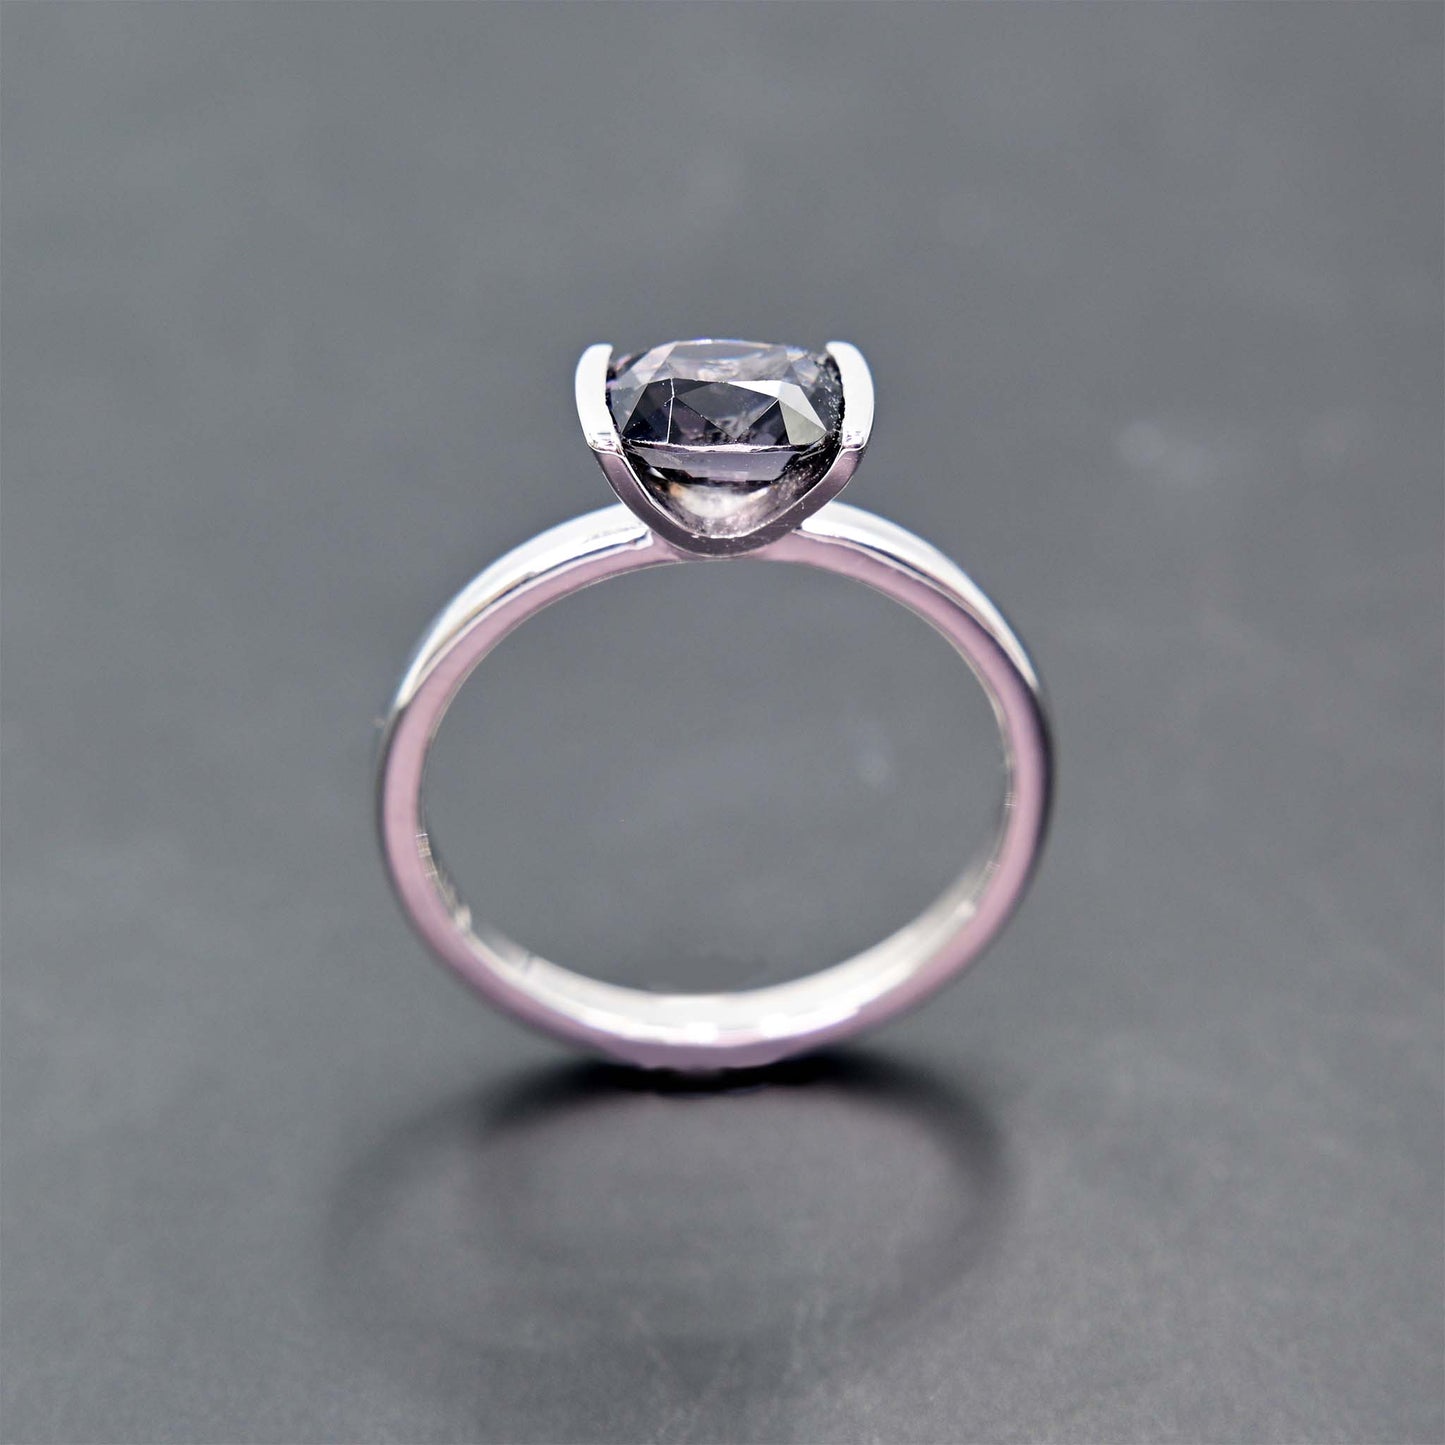 Grey-lilac Fusion Ring with Spinel and 14k white gold